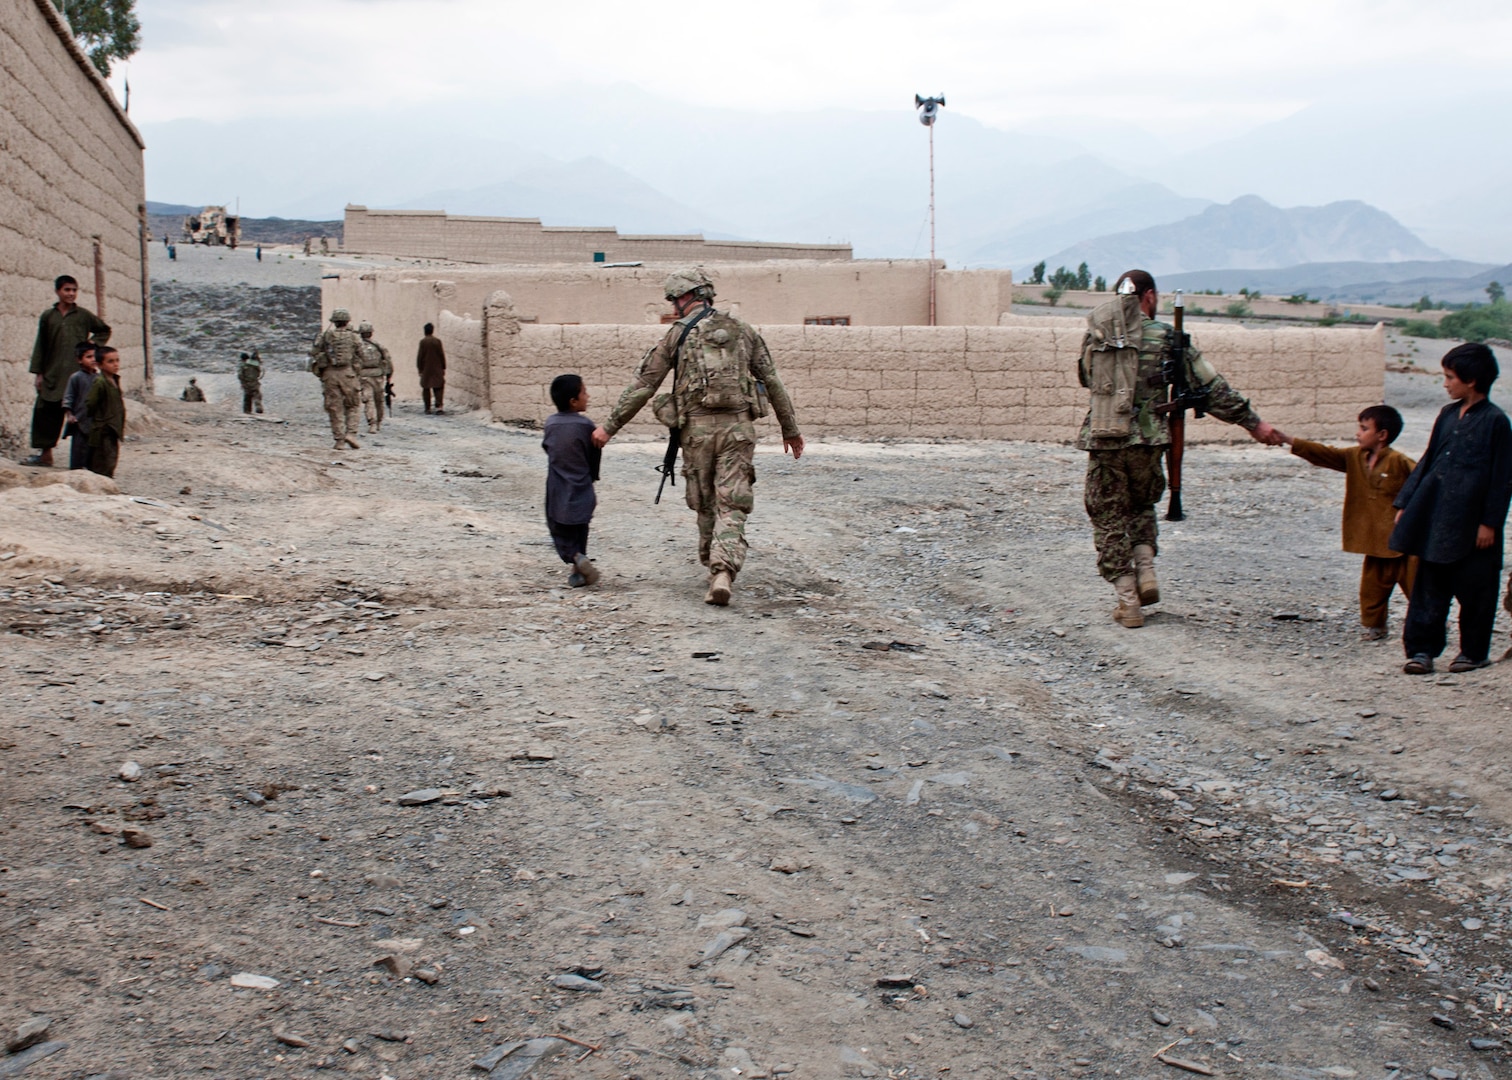 Children in the Sangar Valley reach out to soldiers from 1st Brigade 201st Corps, Afghan National Army and Soldiers form 45th Infantry Brigade Combat Team as they walk back to the mouth of the valley on Oct. 2, 2011. The ANA and 45th IBCT worked together to clear the valley of insurgent activity and to show the local villagers that they are committed to fighting the insurgency wherever it may be.